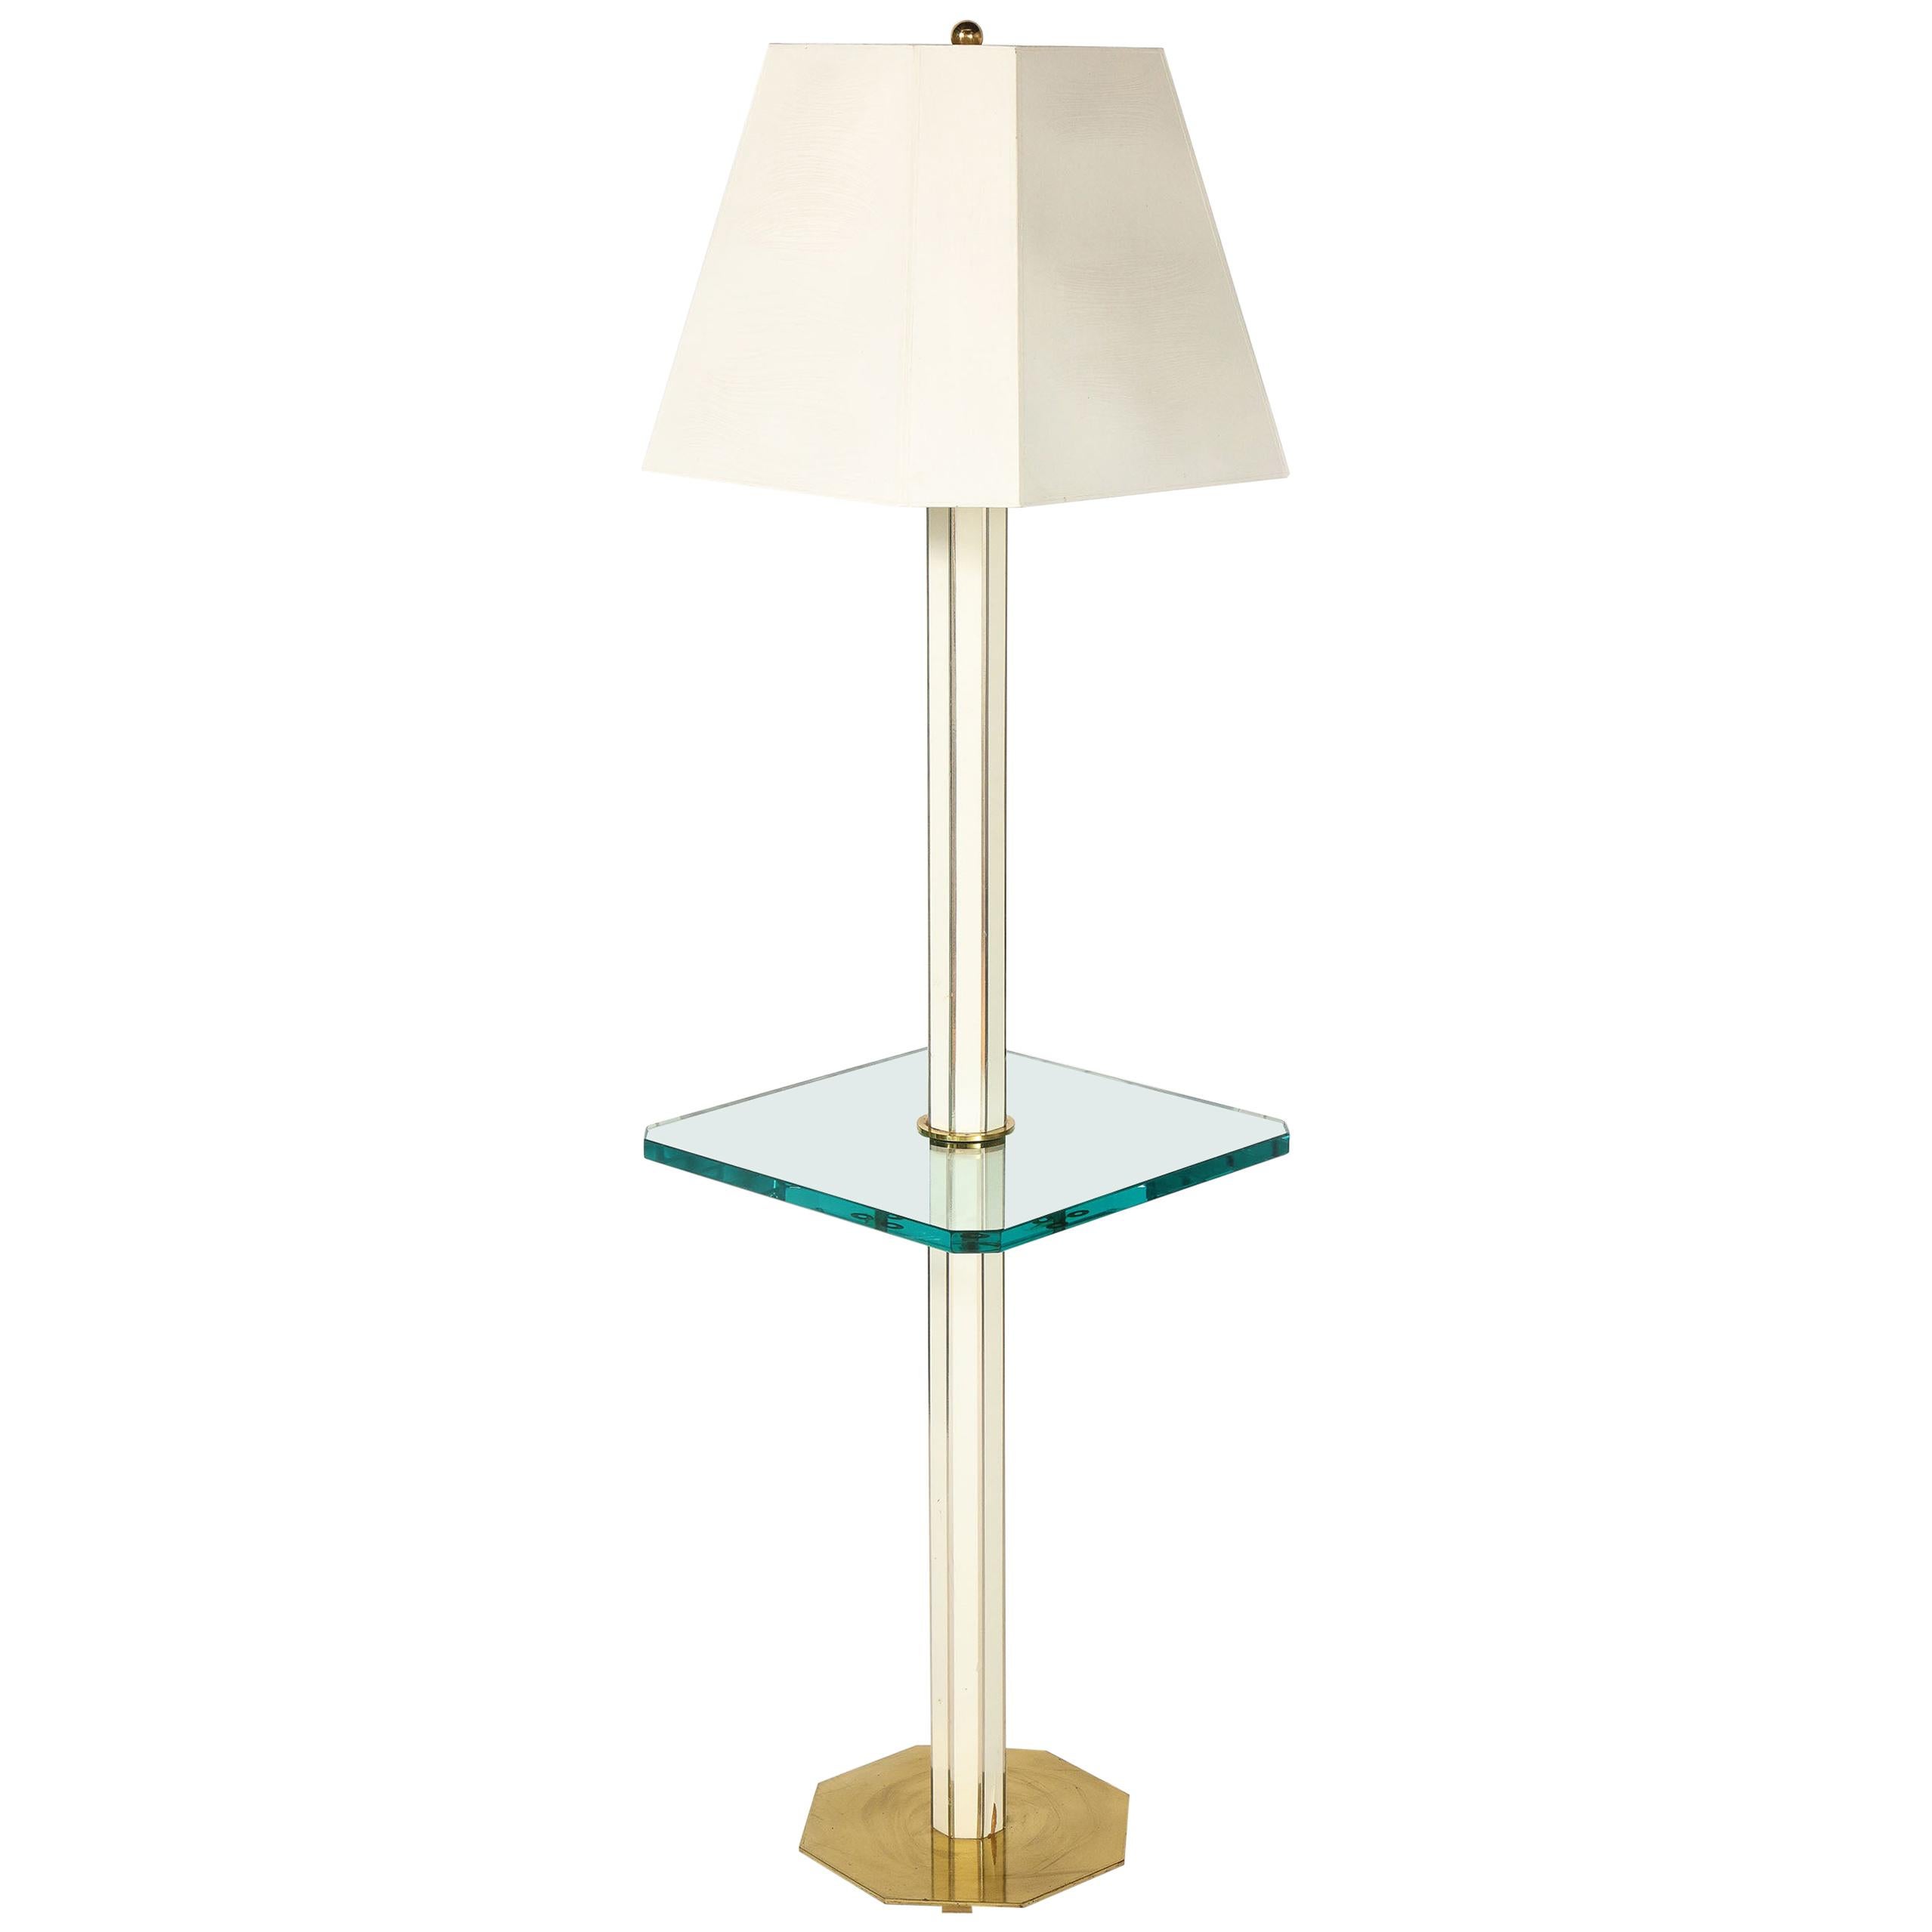 Floor Lamp With Glass Shelf For At, Torchiere Floor Lamp With Shelf